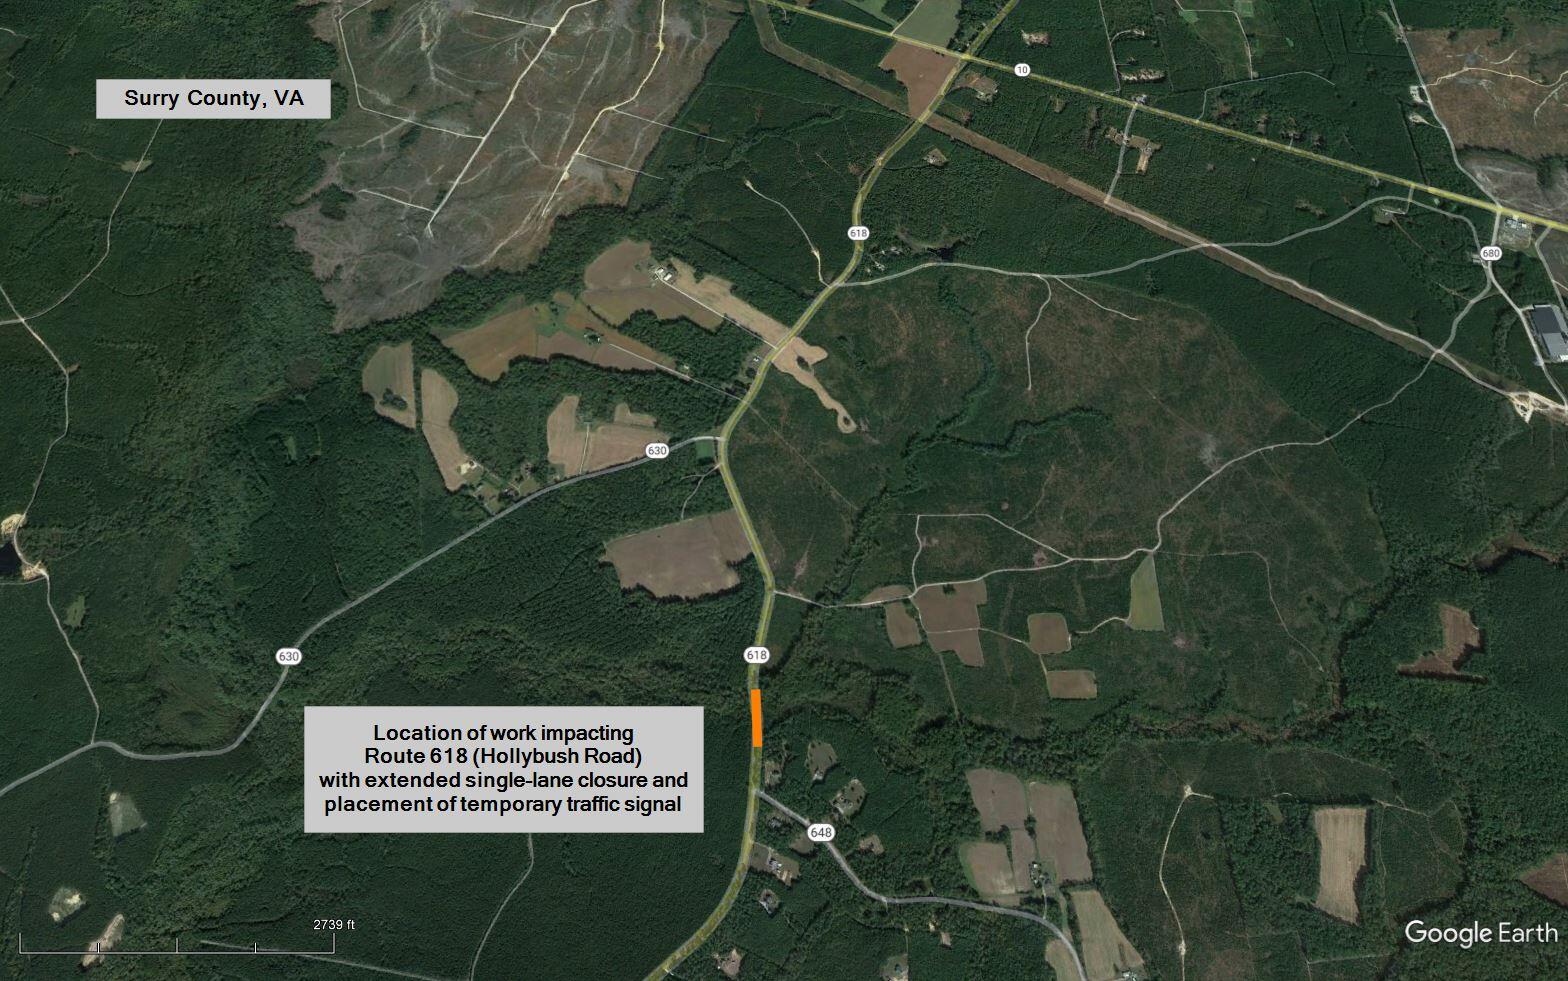 ROUTE 618 (HOLLYBUSH ROAD) CULVERT WORK TO BEGIN IN SURRY COUNTY ...